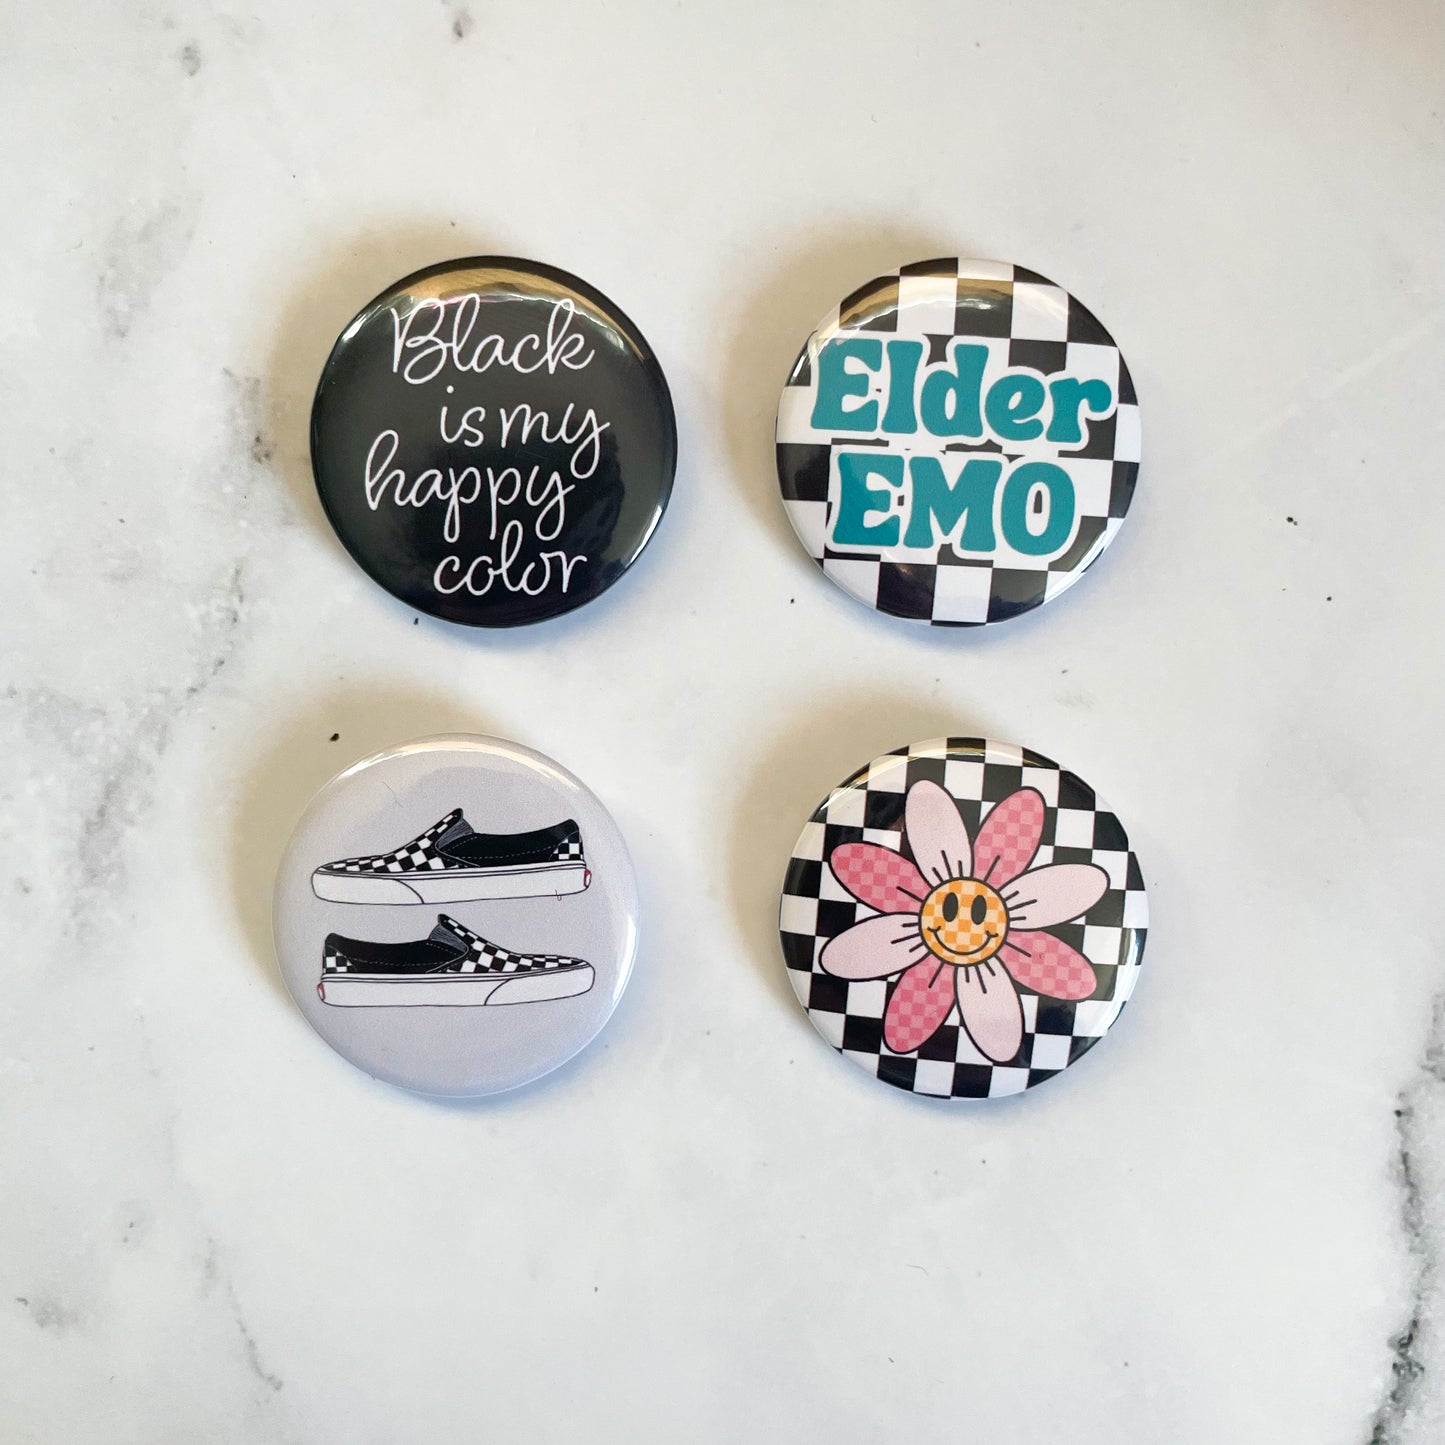 Checkered Vans Button / Badge (Buy 4 Get 1 FREE)